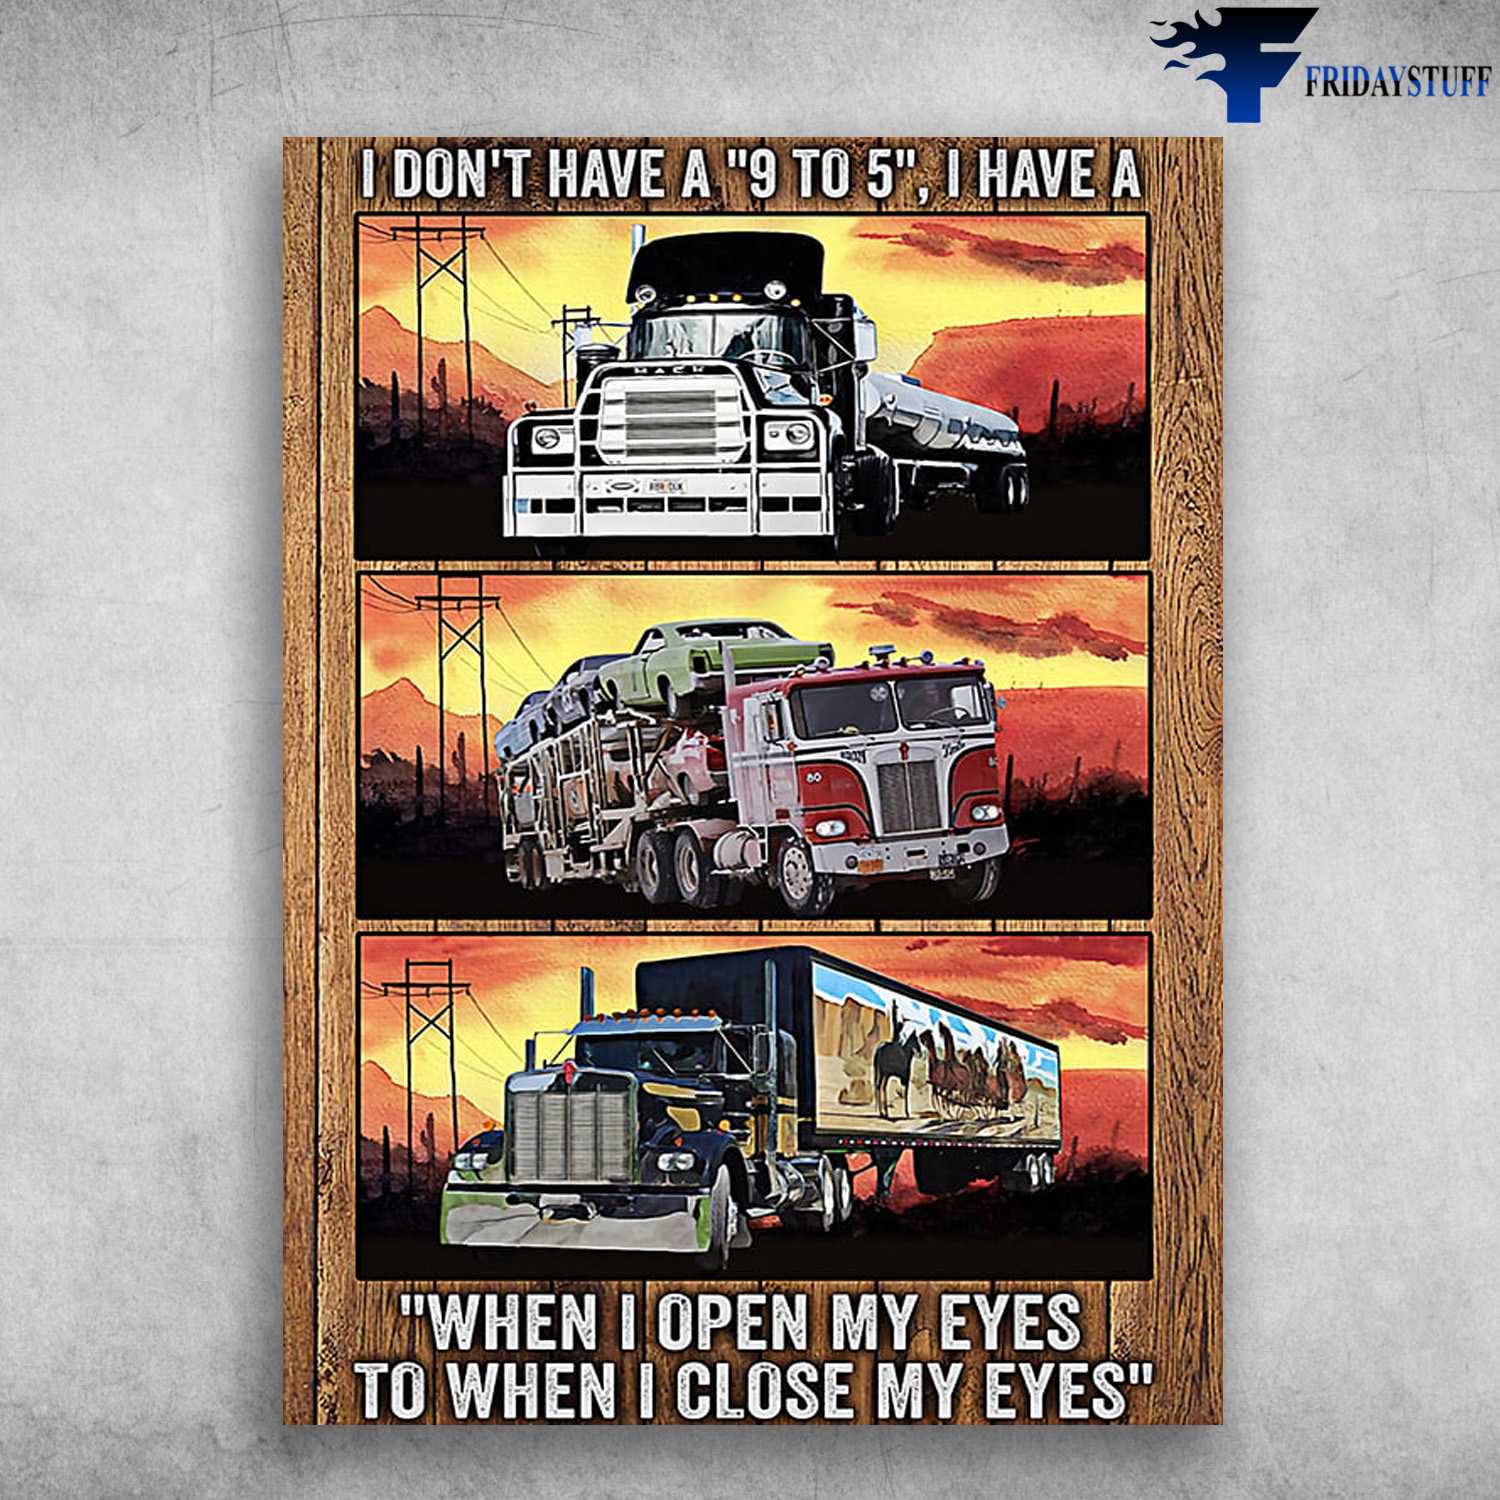 Trucker Poster, I Don't Have A 9 To 5, I Have A Truck, WHen I Open My Eyes, To When I Close My Eyes